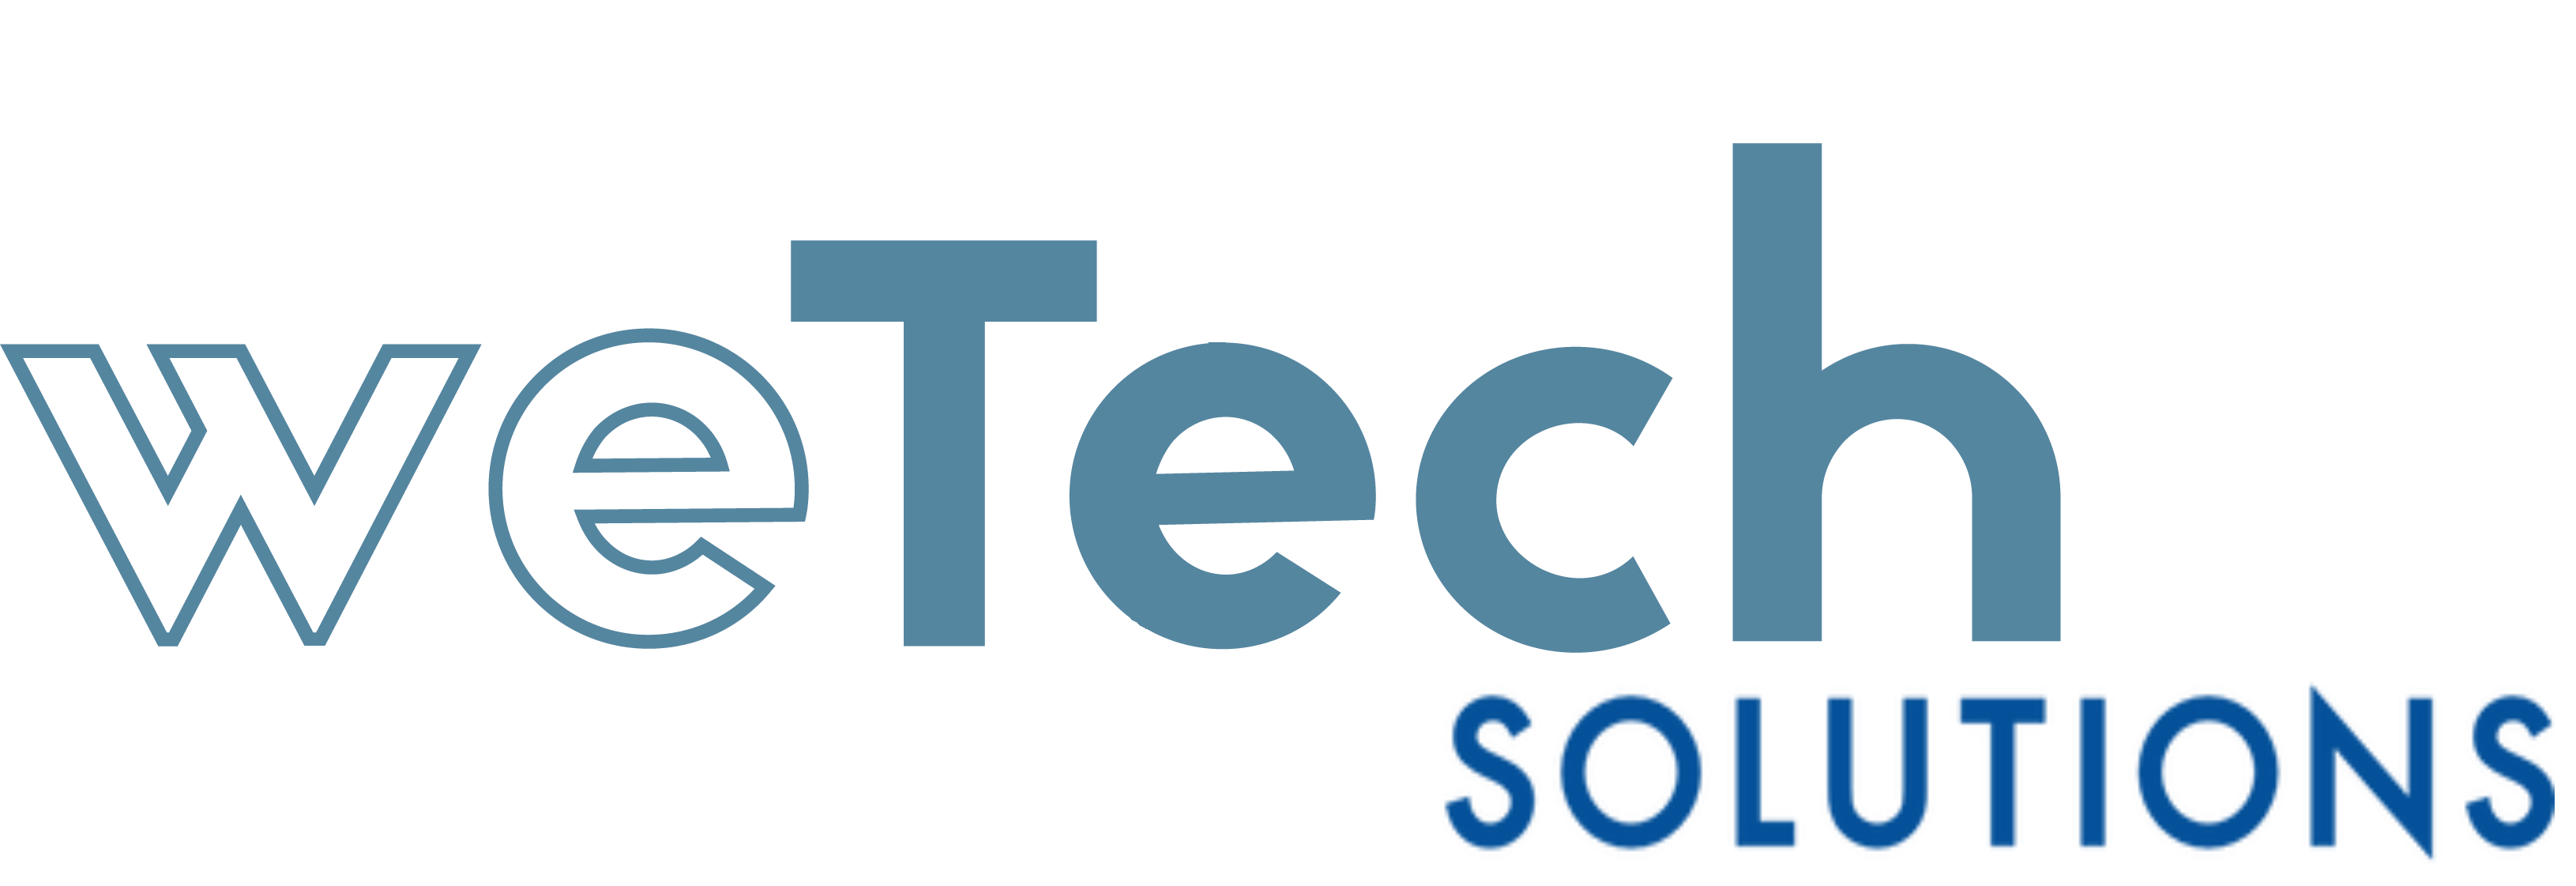 Wetech Solutions